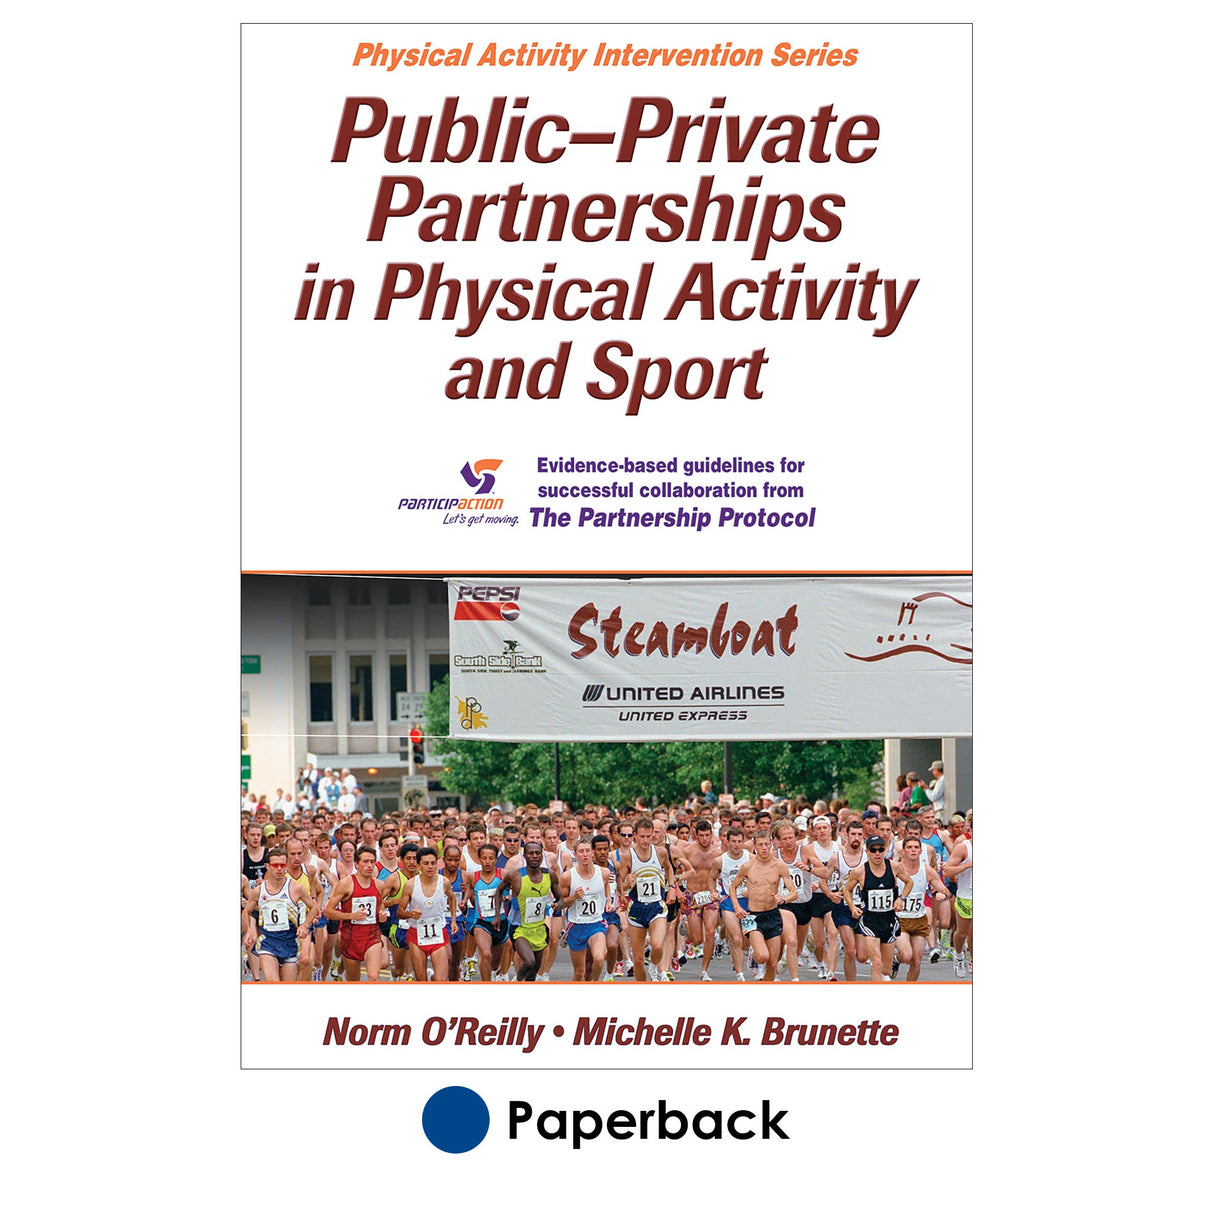 Public-Private Partnerships in Physical Activity and Sport